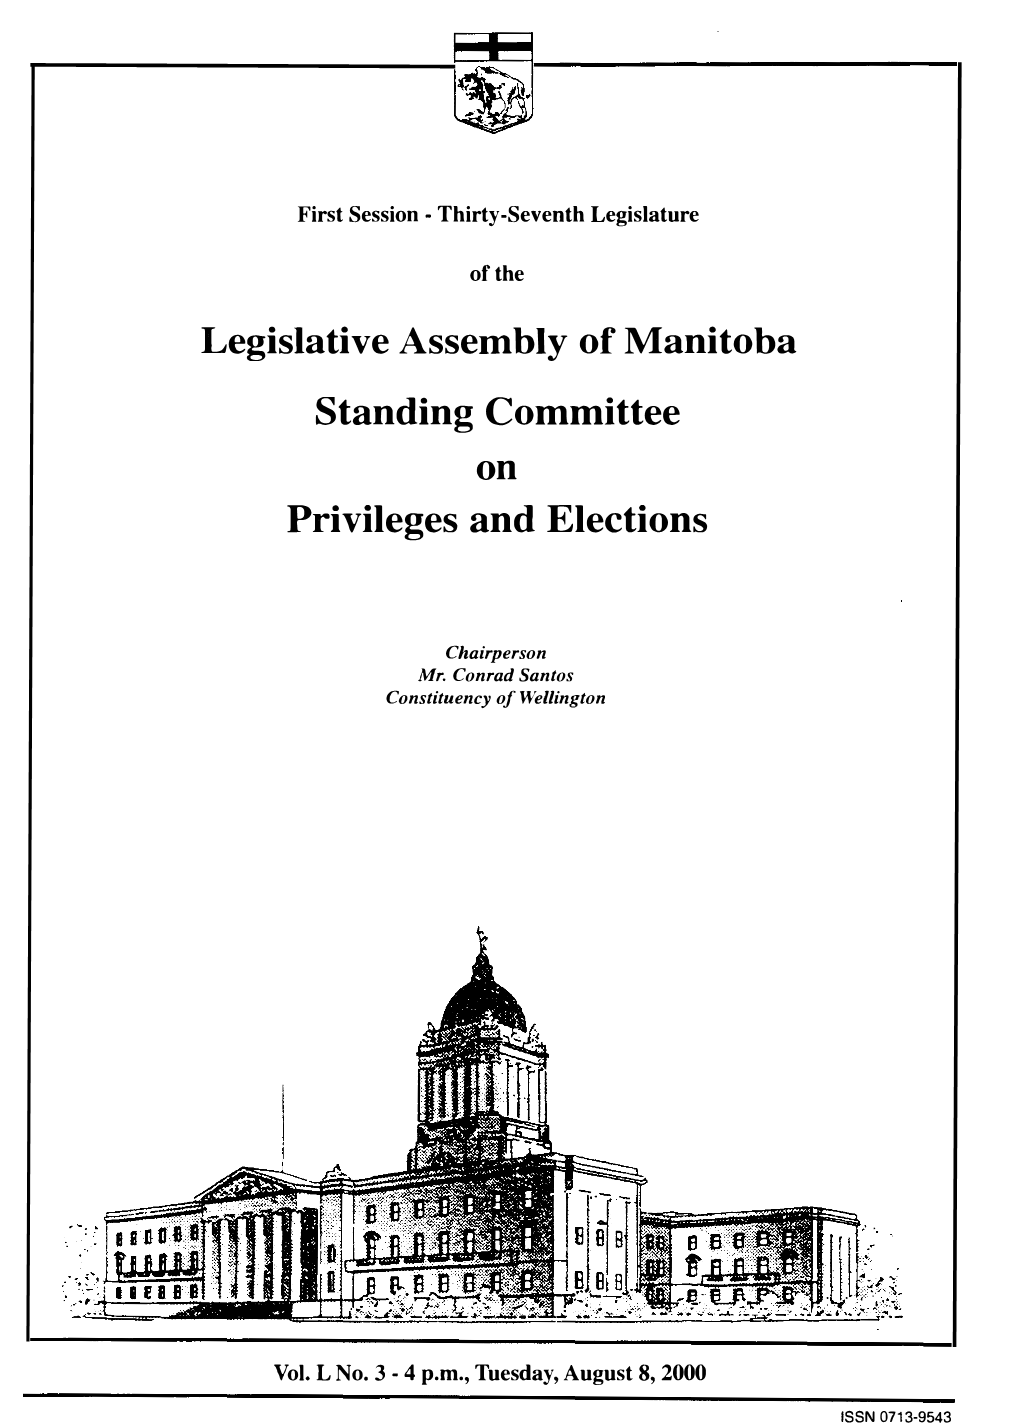 Legislative Assembly of Manitoba Standing Committee on Privileges